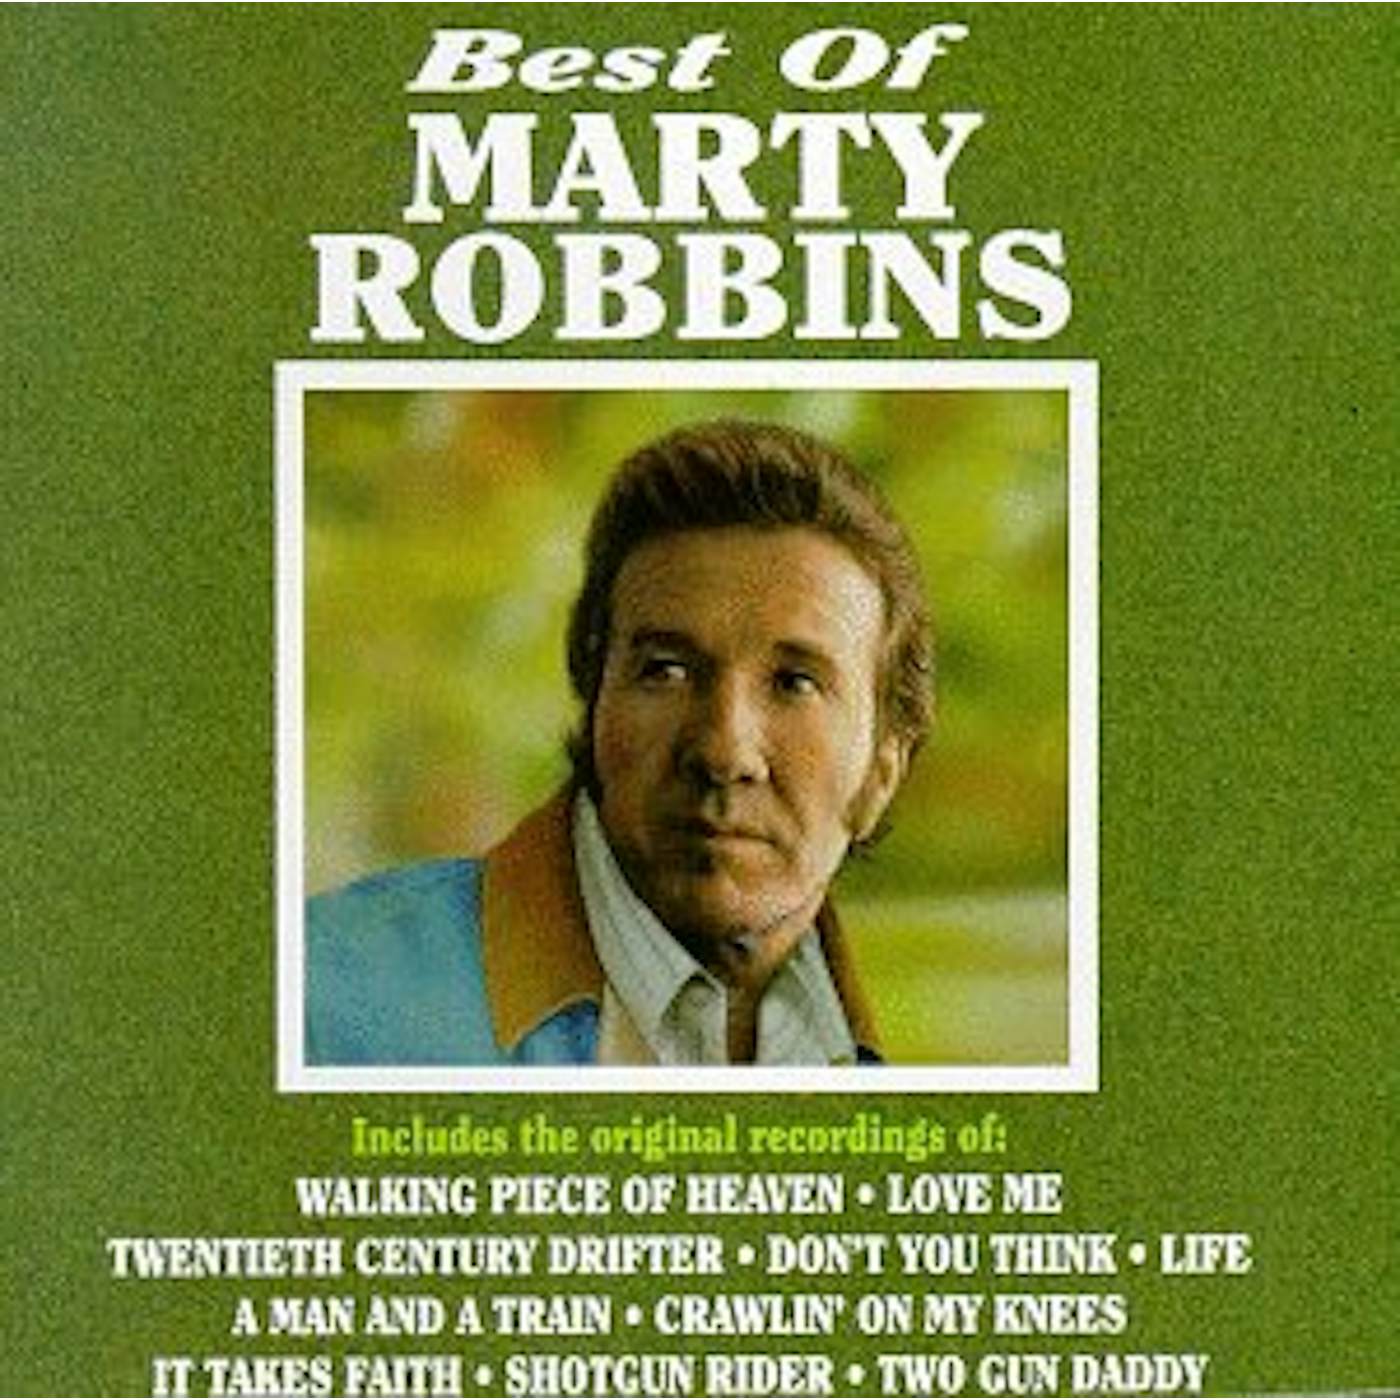 Marty Robbins BEST OF CD